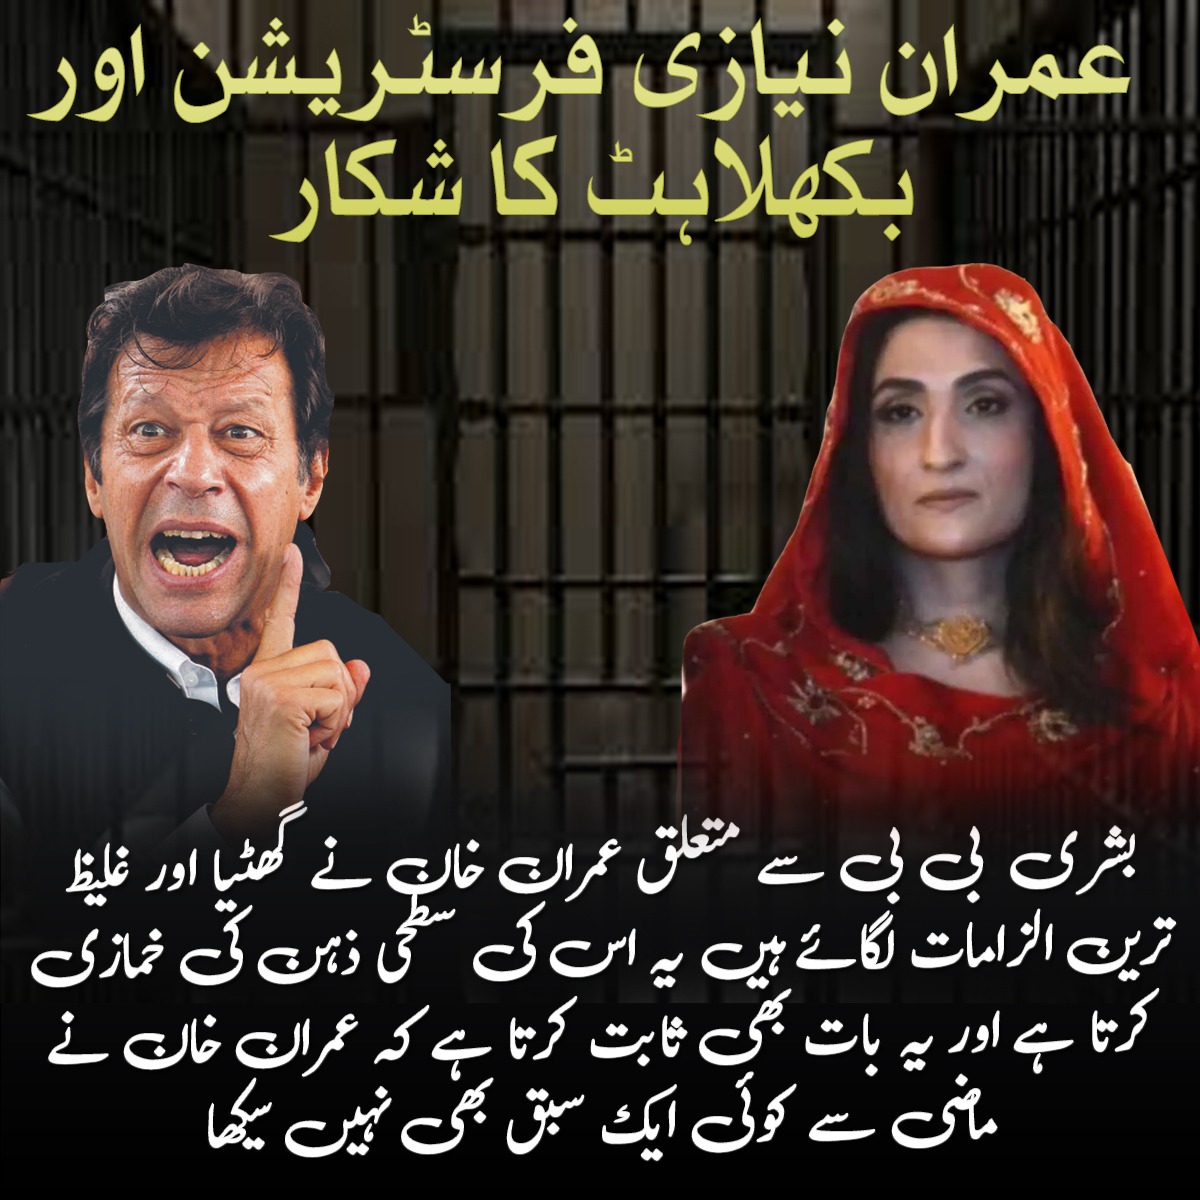 Imran Niazi chatter in jail is symptomatic of a failed leadership clinging to bitterness. His own party leaders are distancing, recognizing his rhetoric lacks substance amidst our nation’s progress.

#PagalNiazi